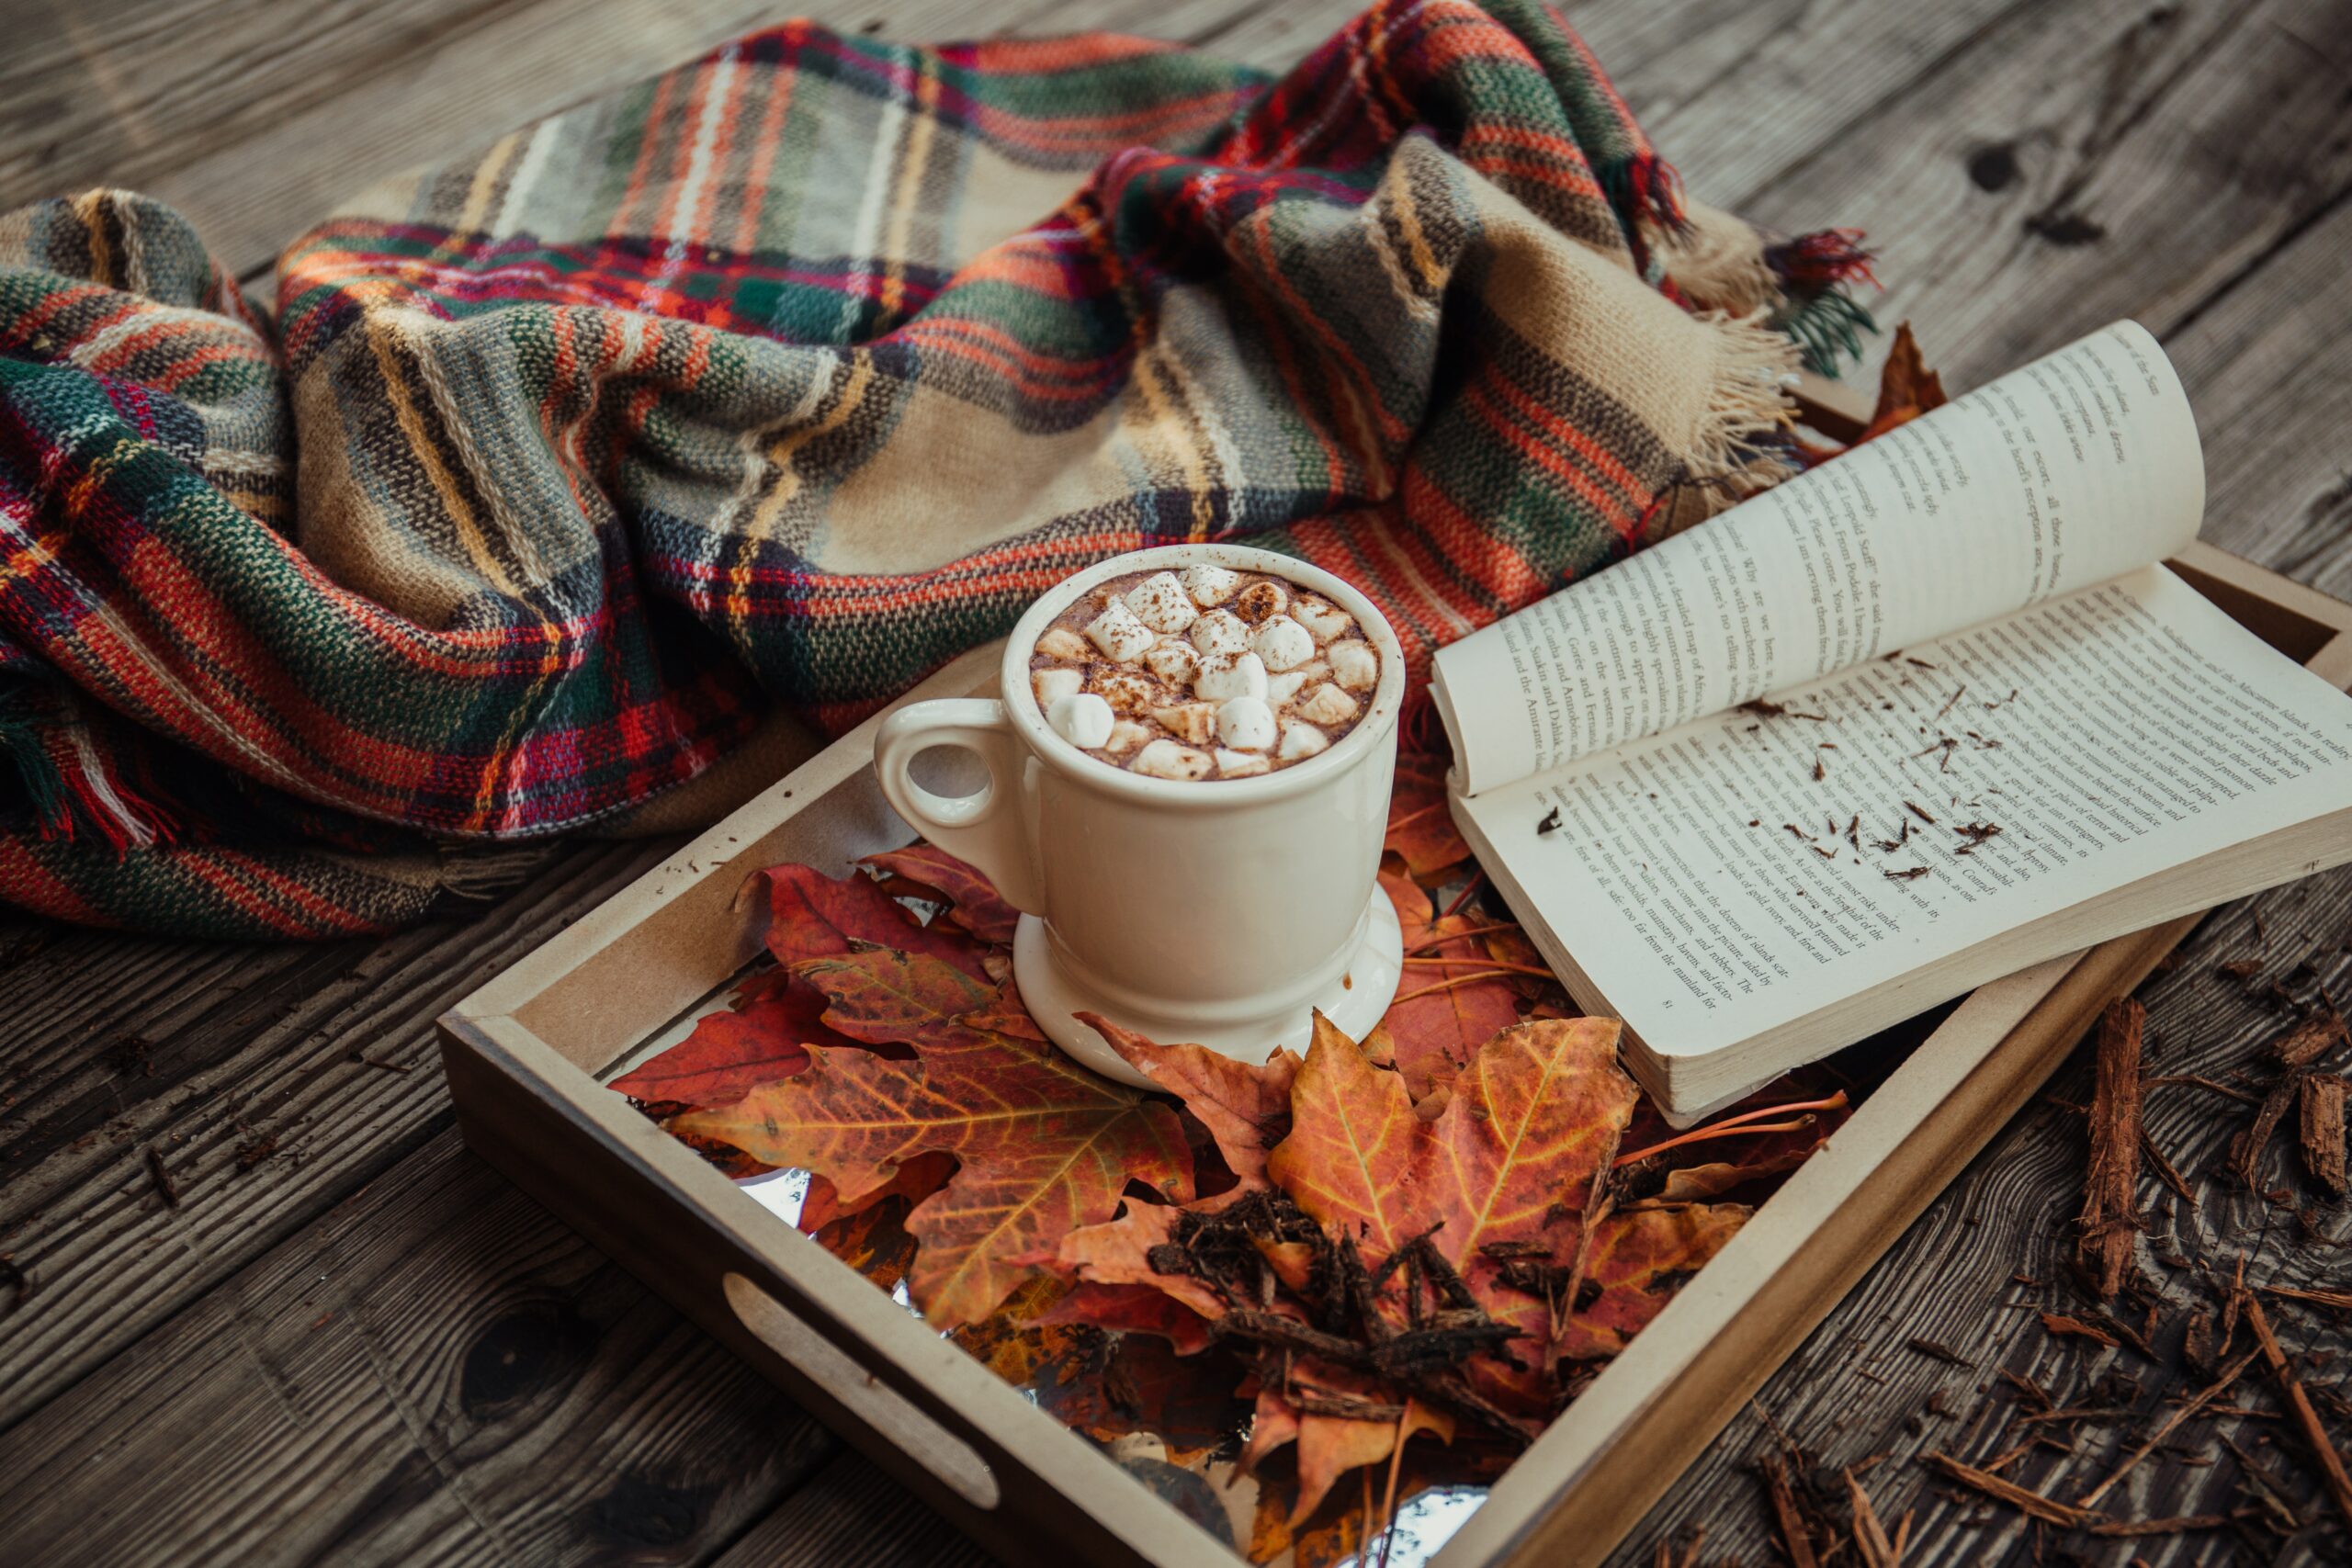 A pile of leaves with a book on top, a mug of hot chocalate set upon the book